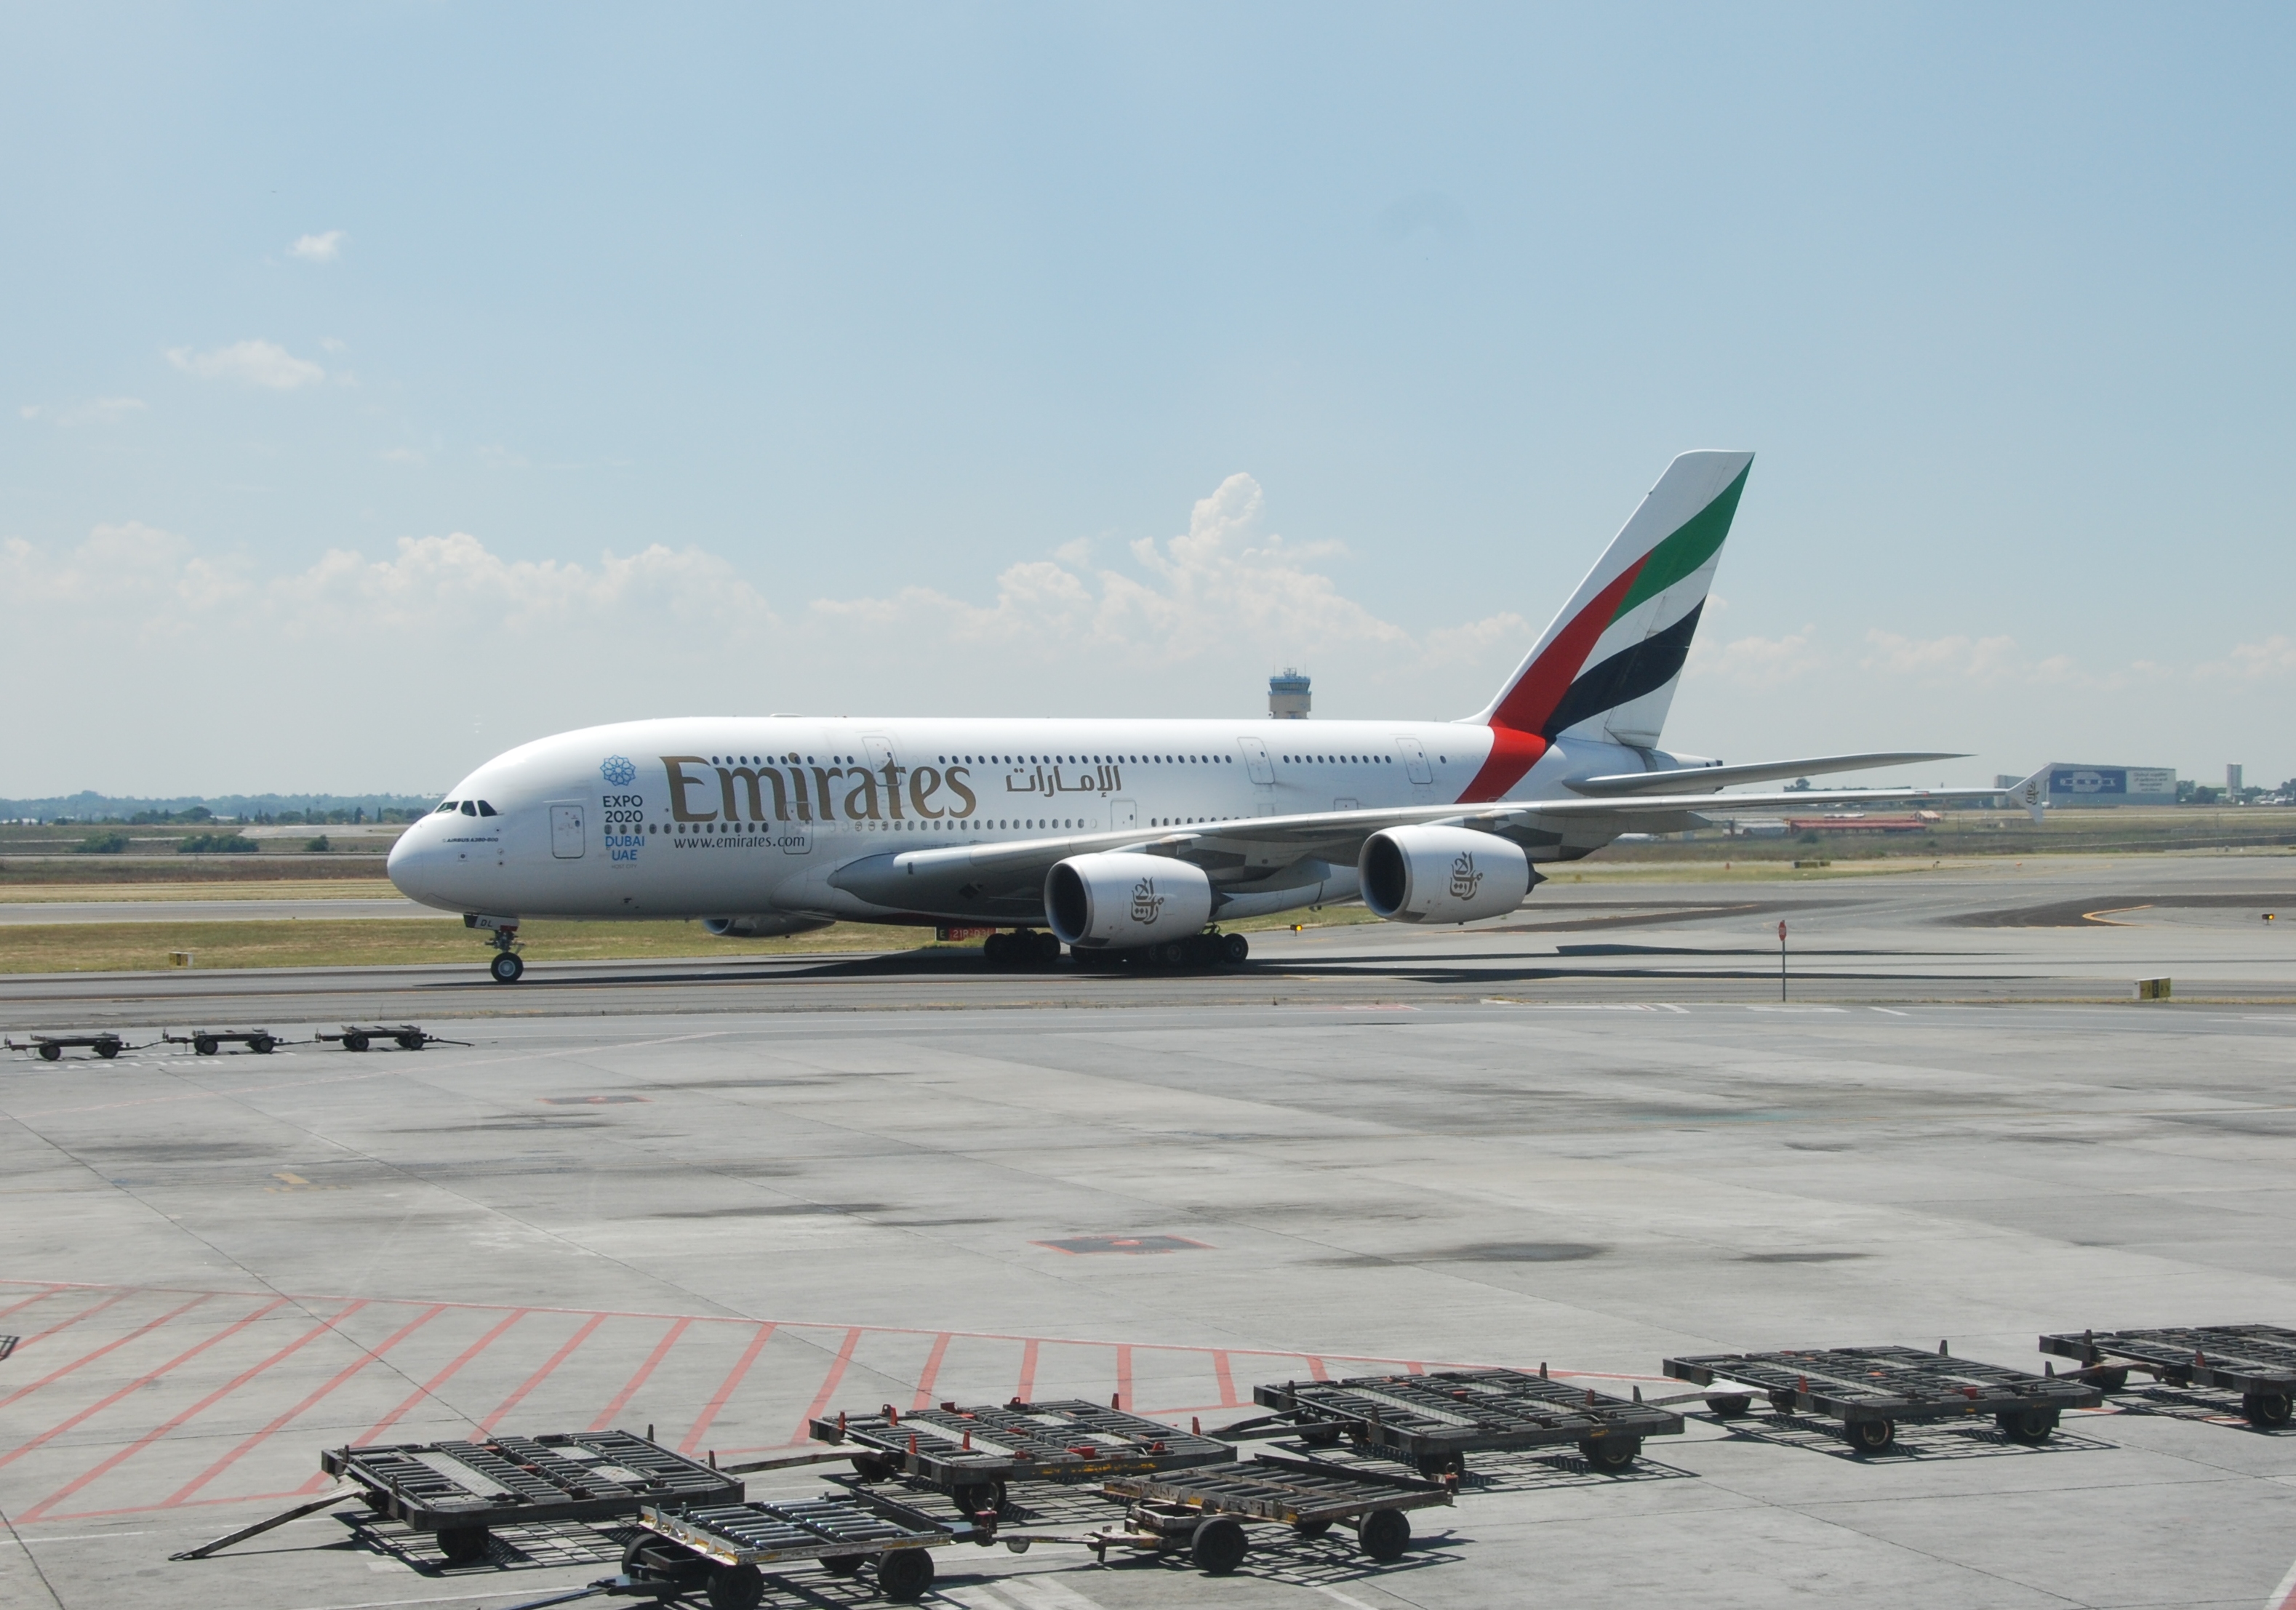 Spotting Emirates’ Airbus A380 @ Johannesburg Airport